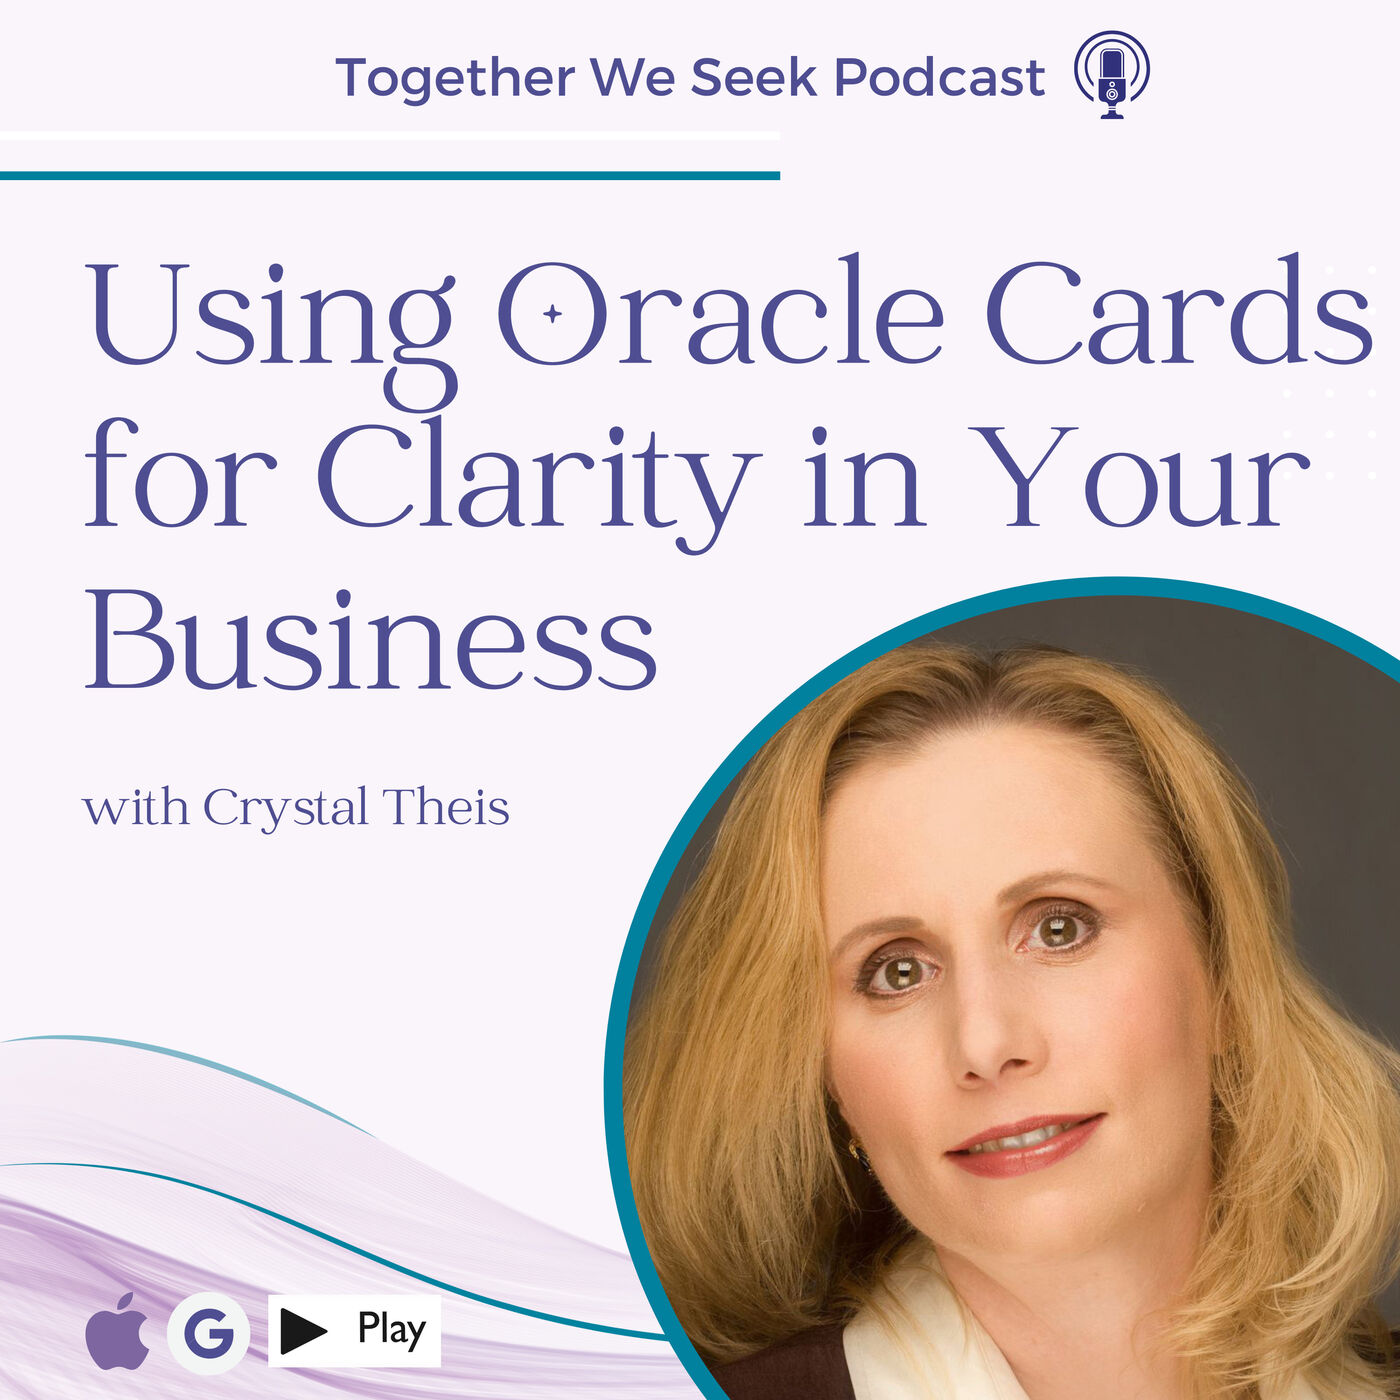 Using Oracle Cards for Business Insights with Crystal Thies